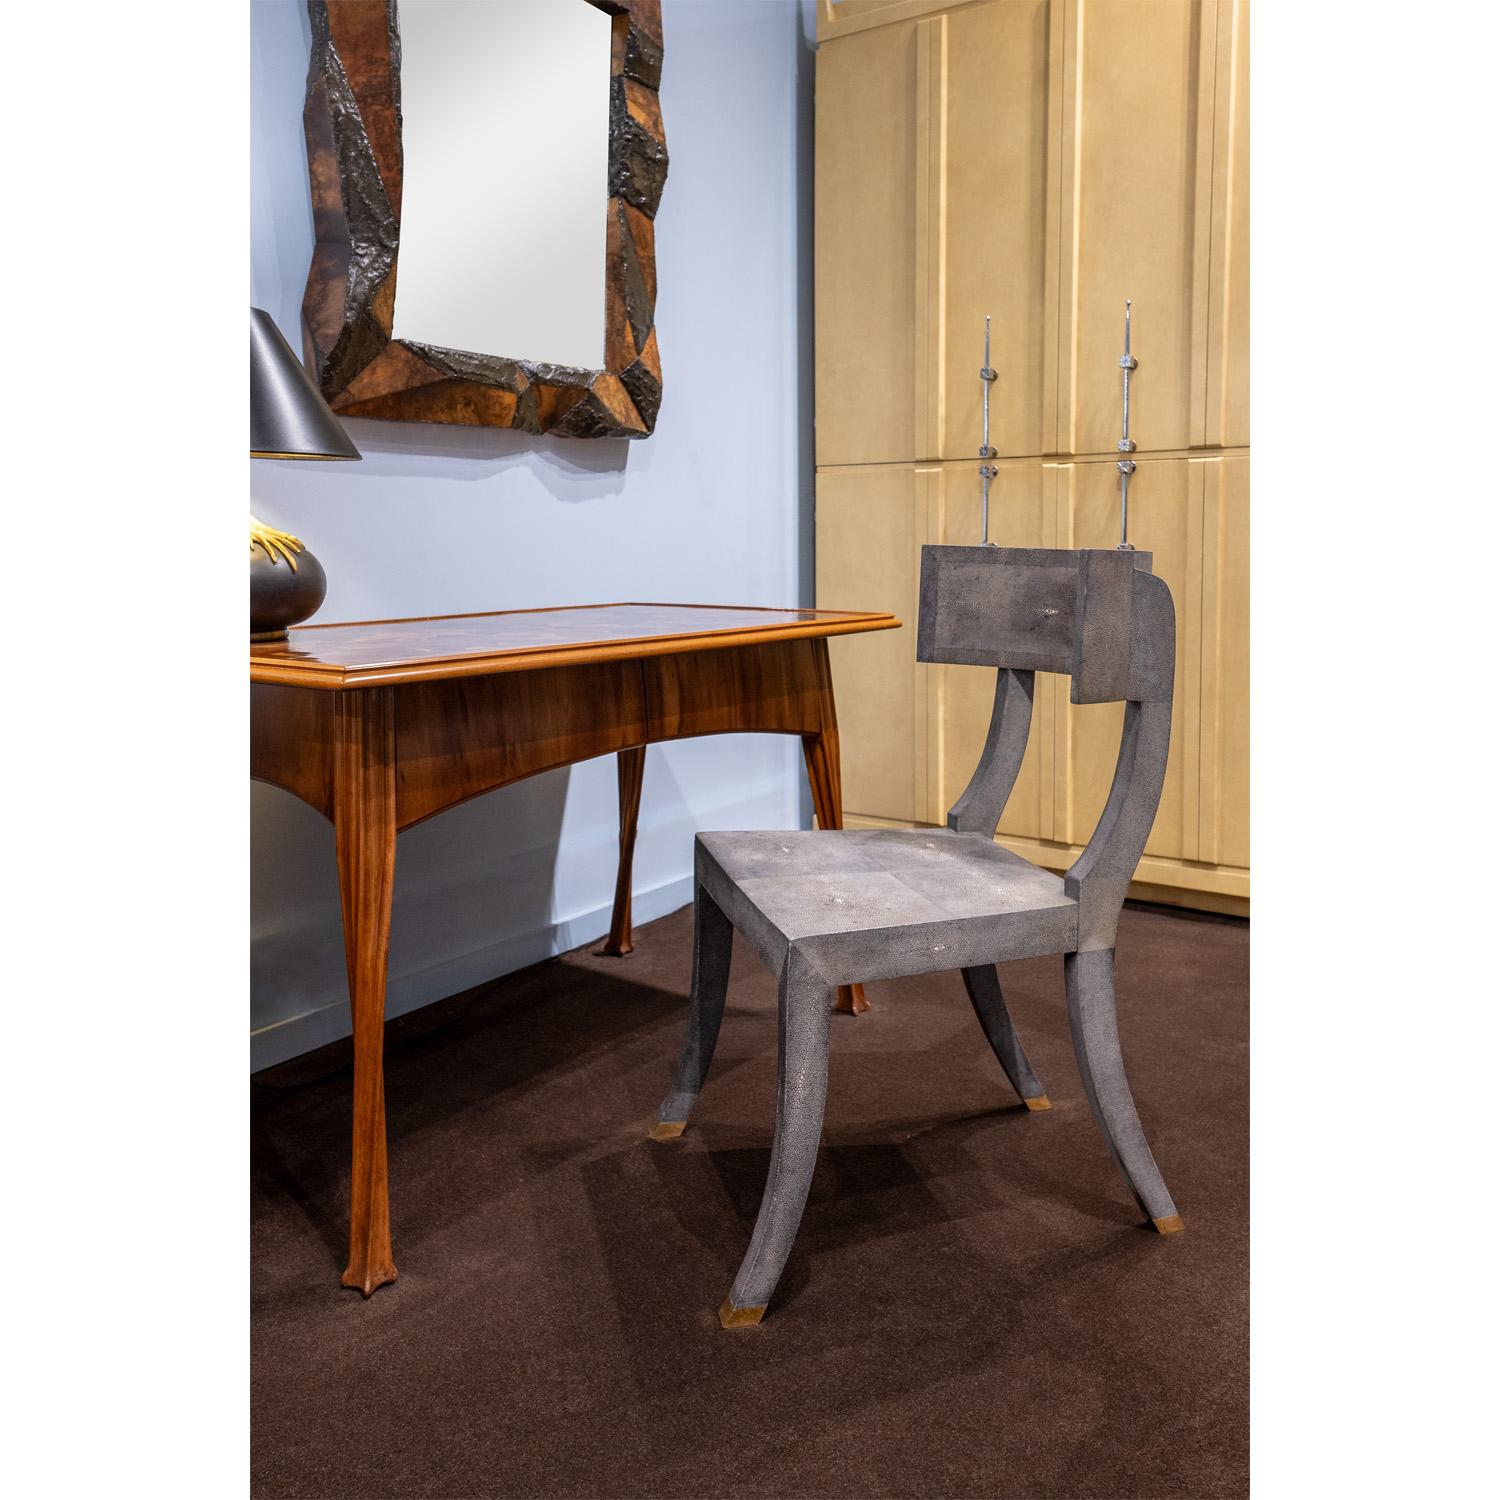 Exquisite Klismos Chair in Blue/Gray Shagreen with Brass Sabots 1980s For Sale 2